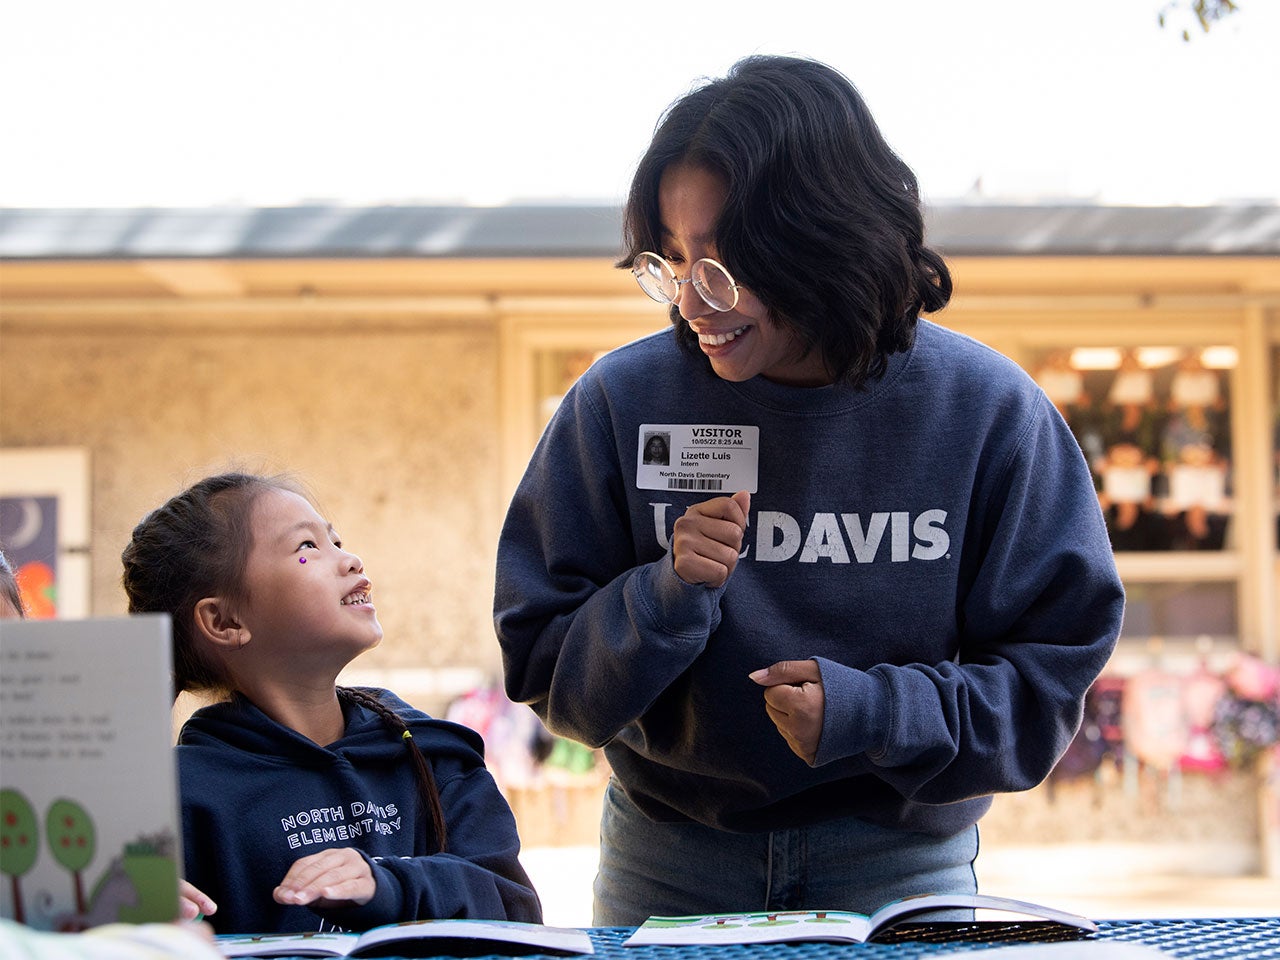 A student in a dark blue UC Davis sweater and round-rimmed glasses helps an elementary student read a picture book. The elementary student looks up at the UC Davis student with a big smile.